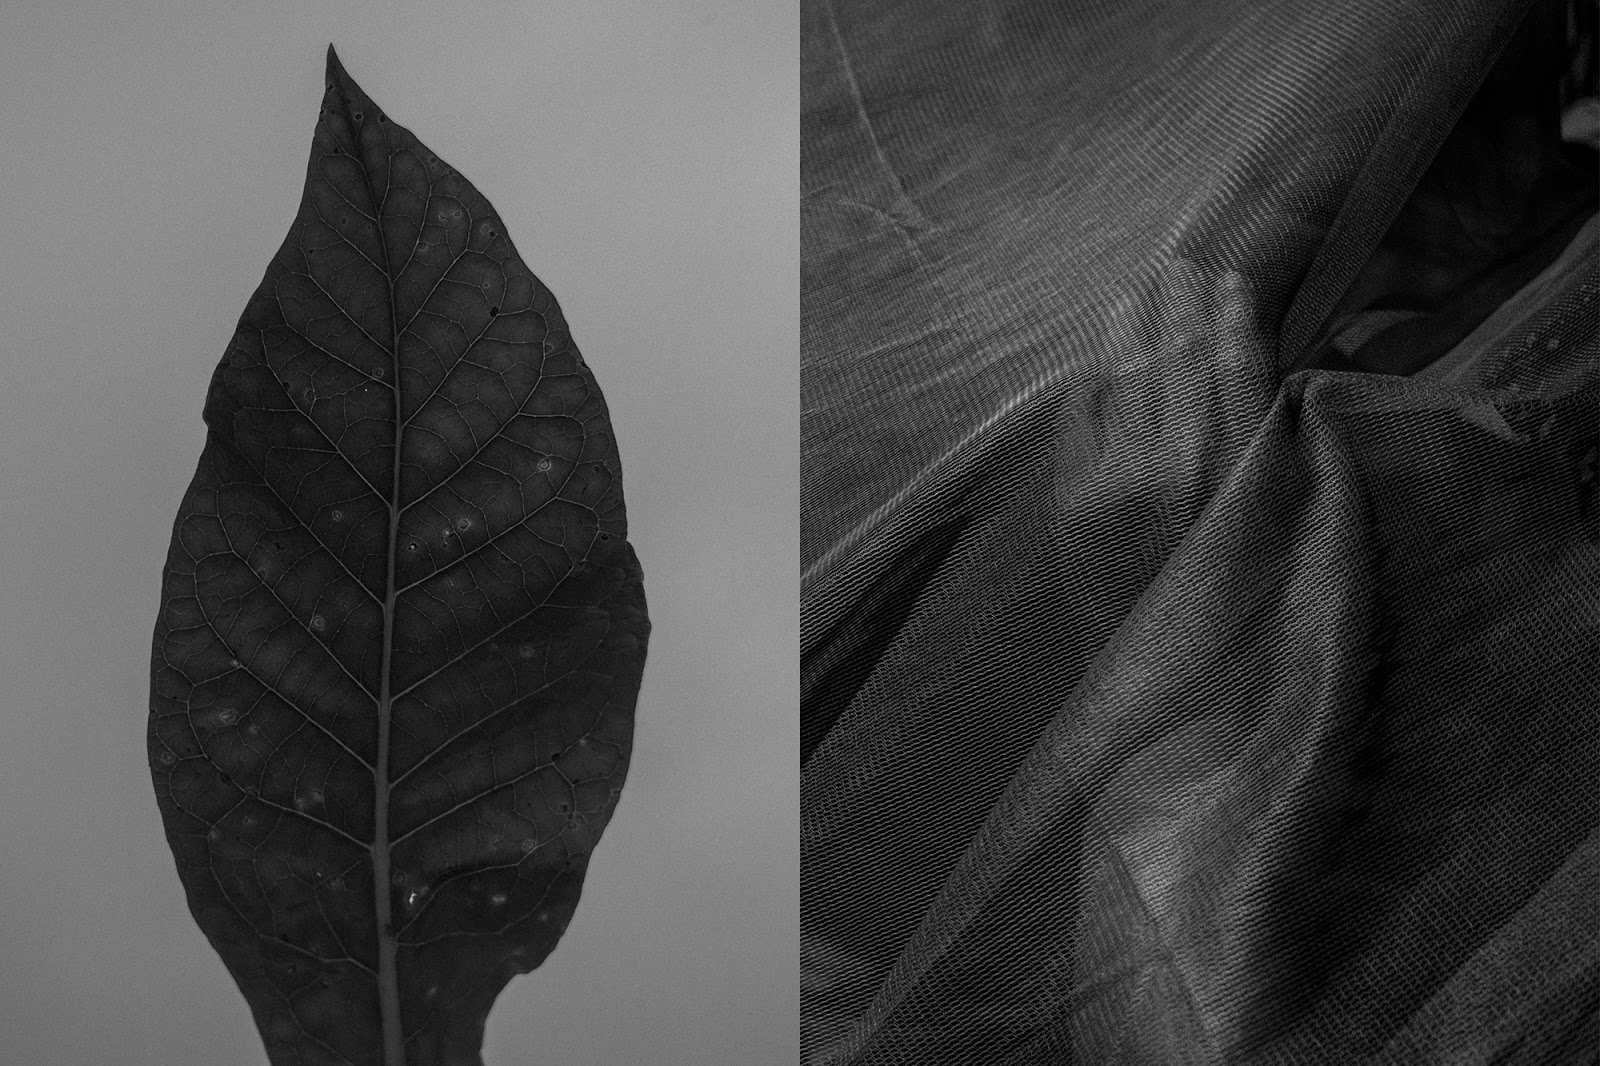 Image on the left is of a leaf, and on the right is a hand resting on someone's chest, seen through a mosquito net.